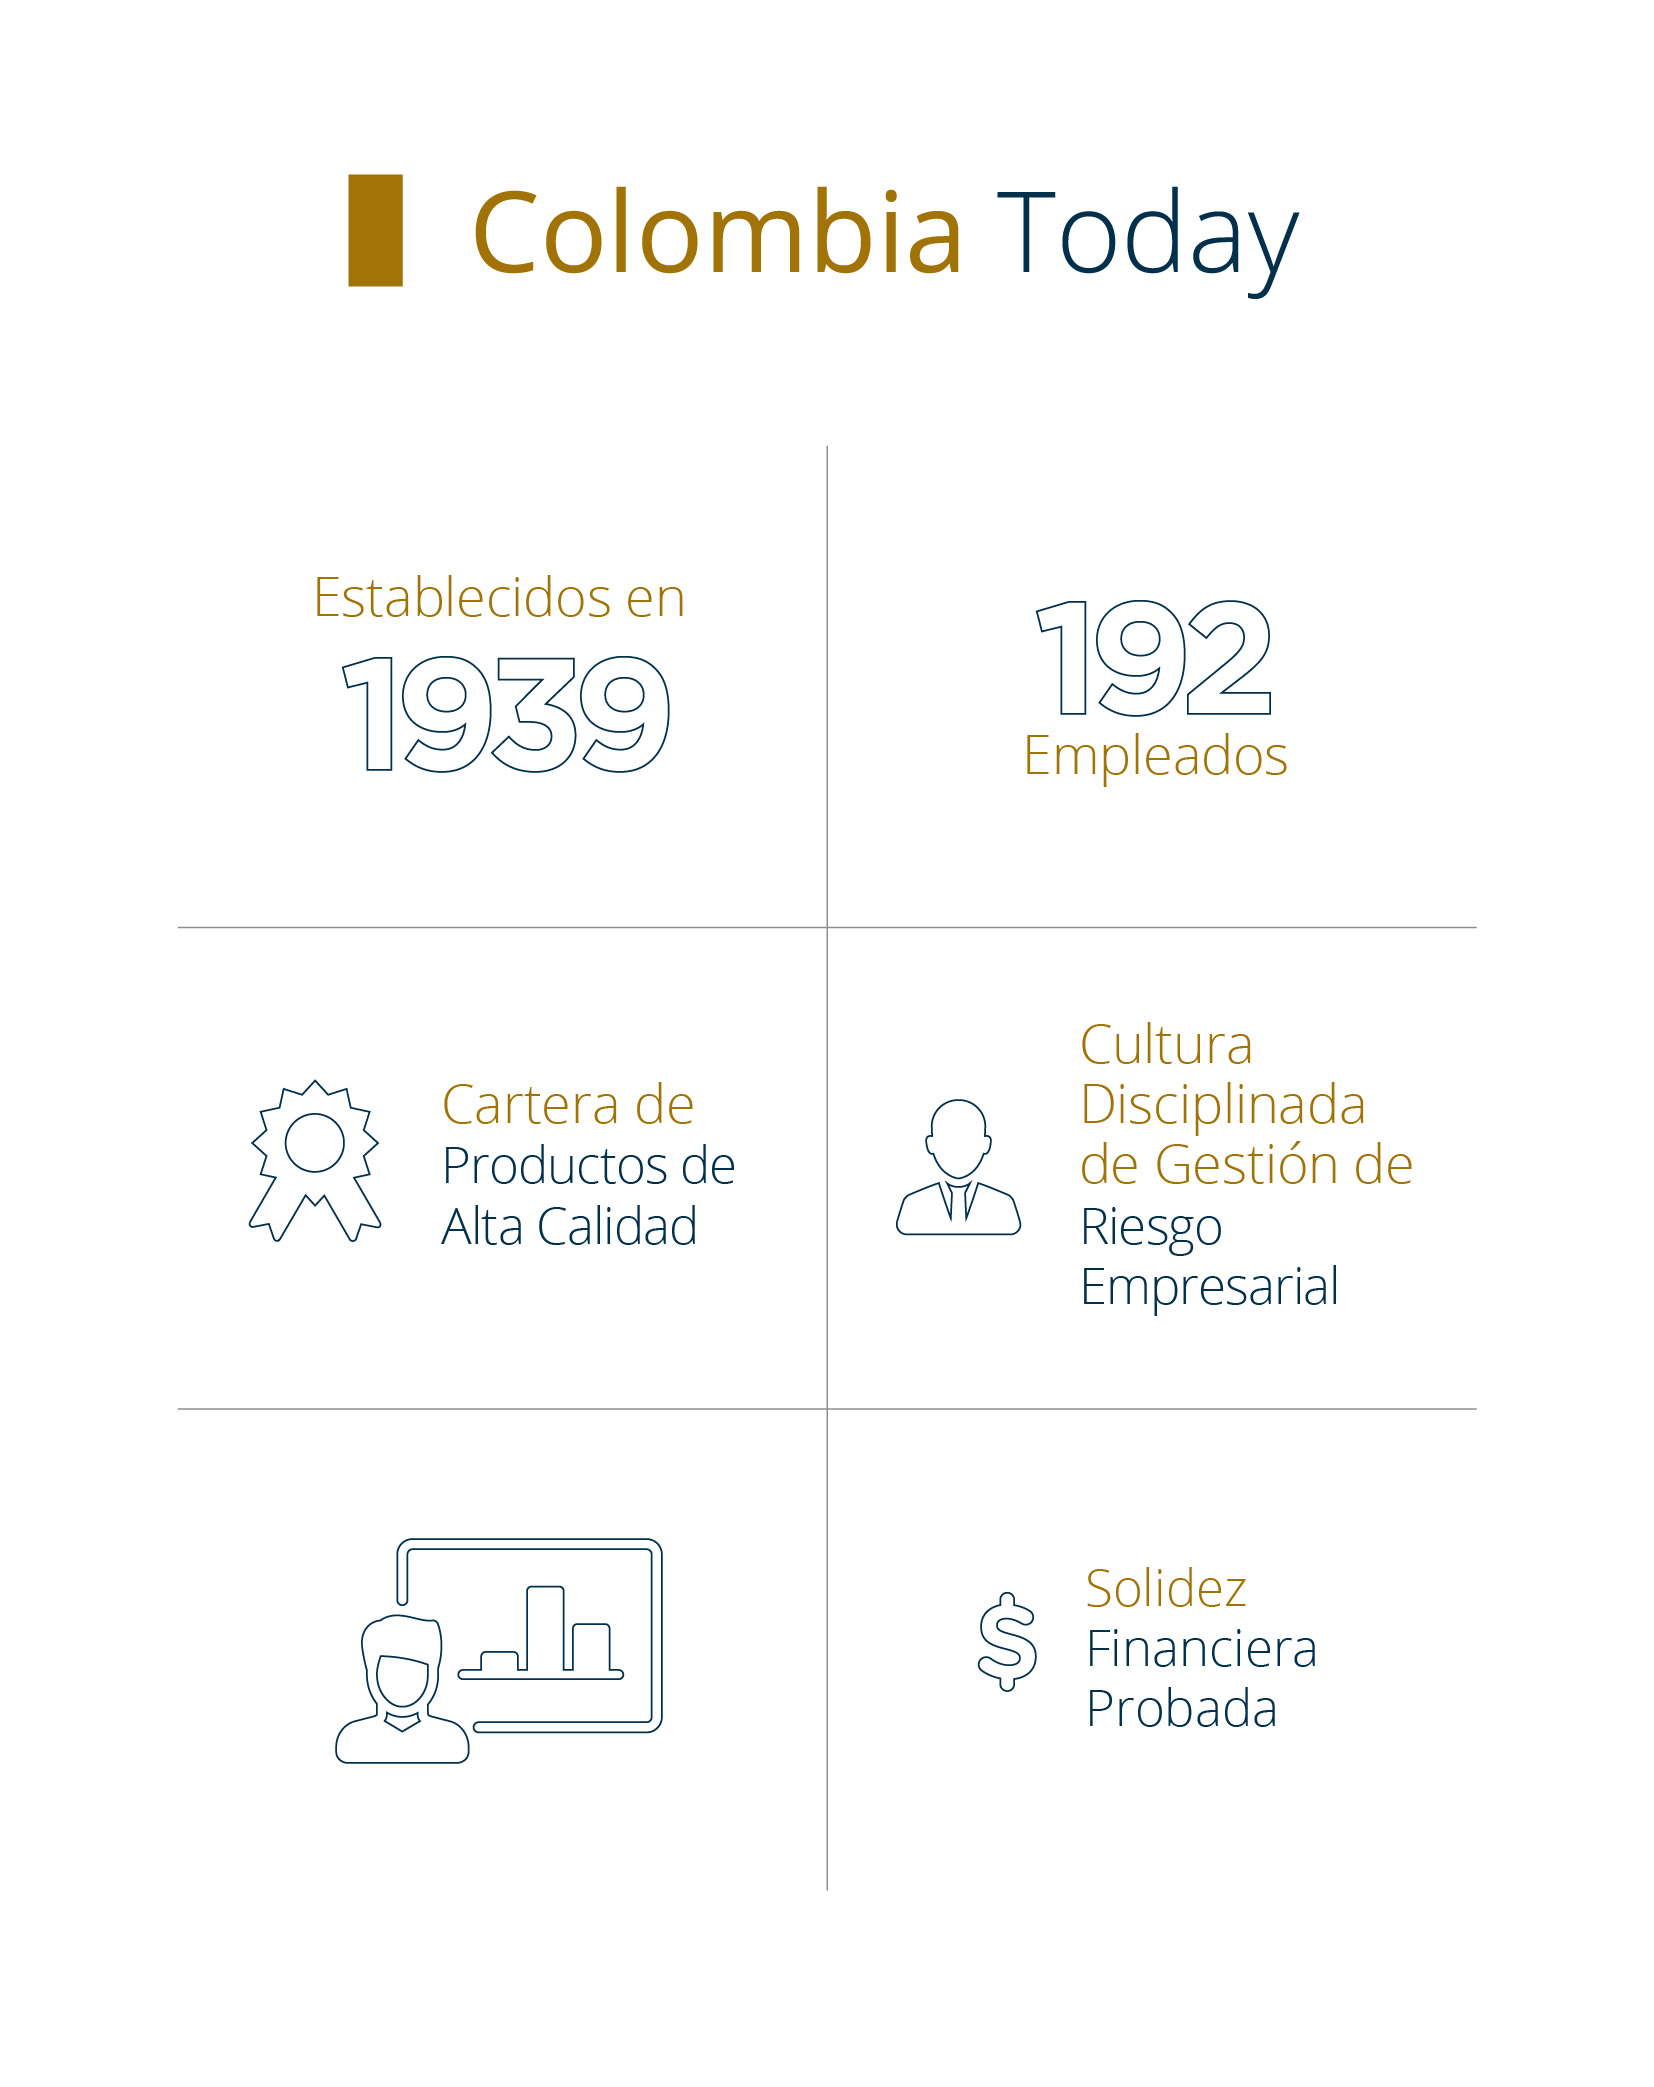 PALIG Colombia infographic